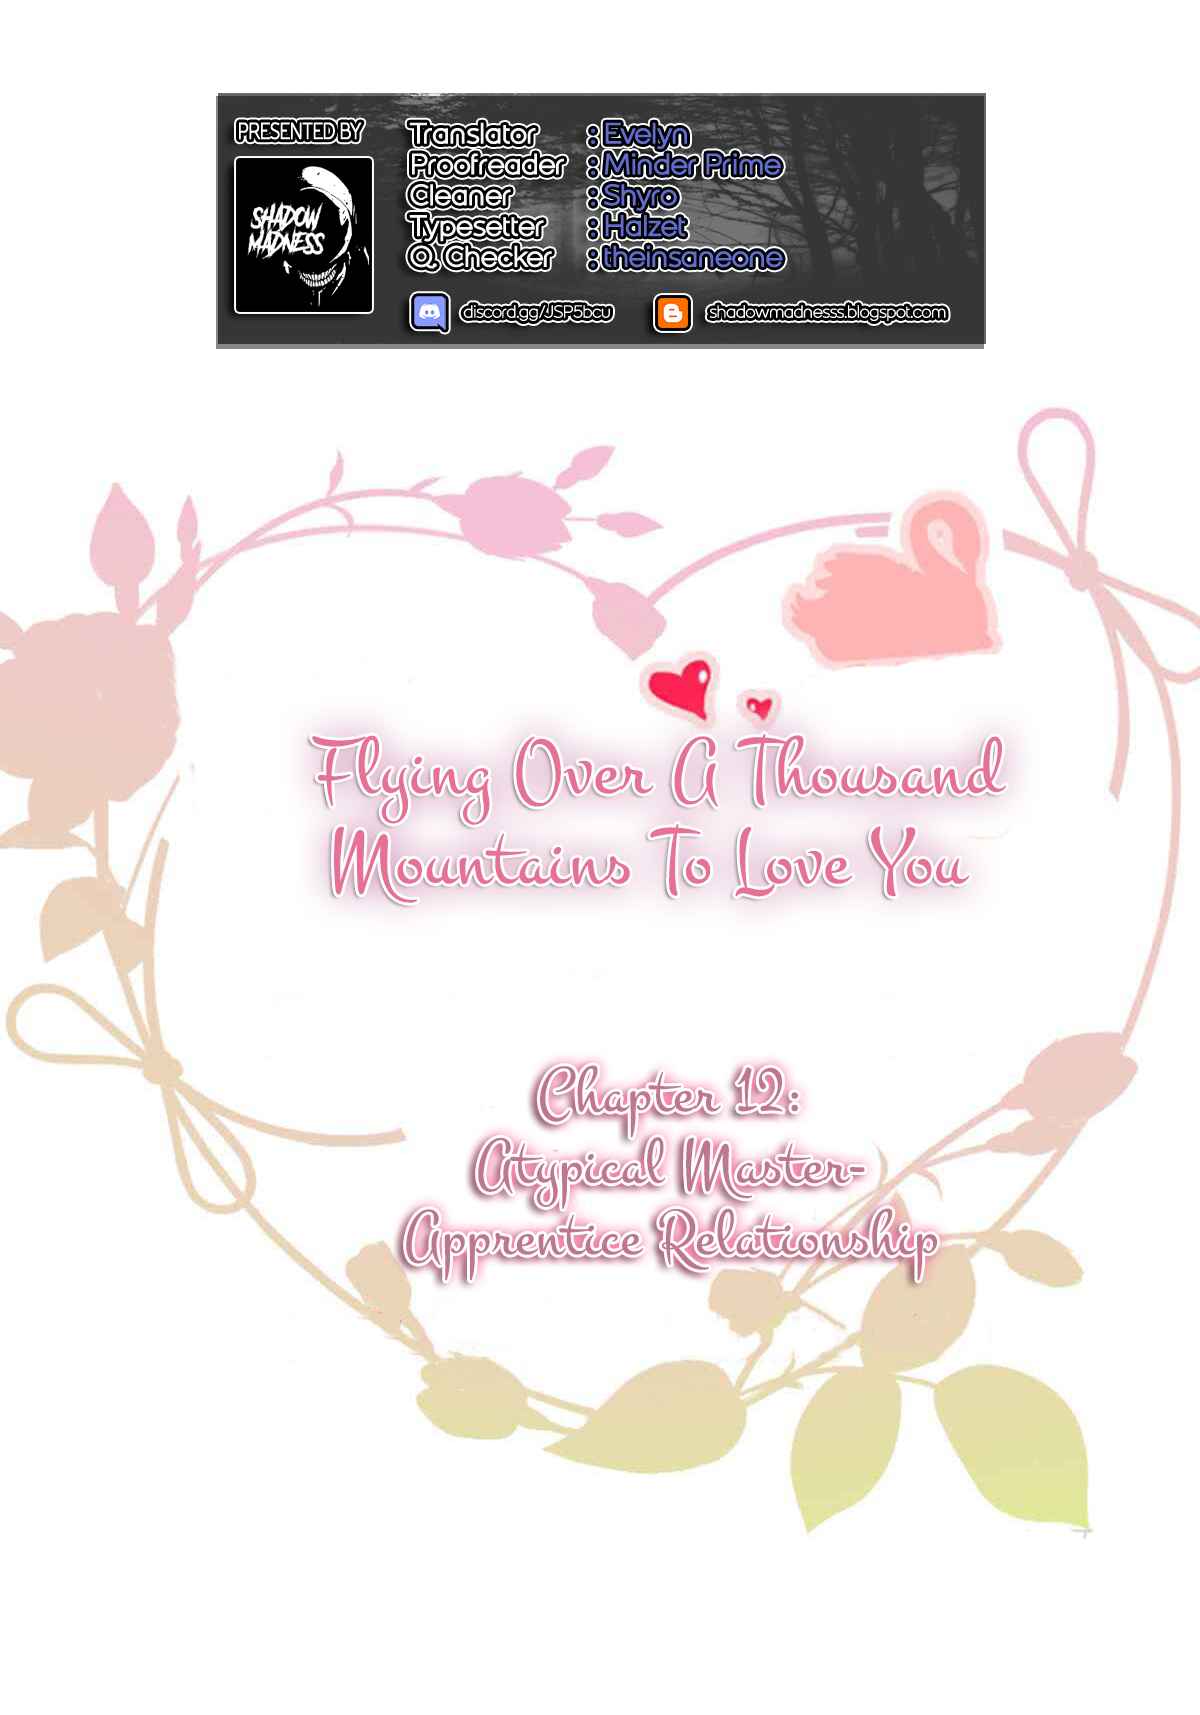 Flying Over a Thousand Mountains to Love You Ch. 12 Atypical Master Apprentice Relationship